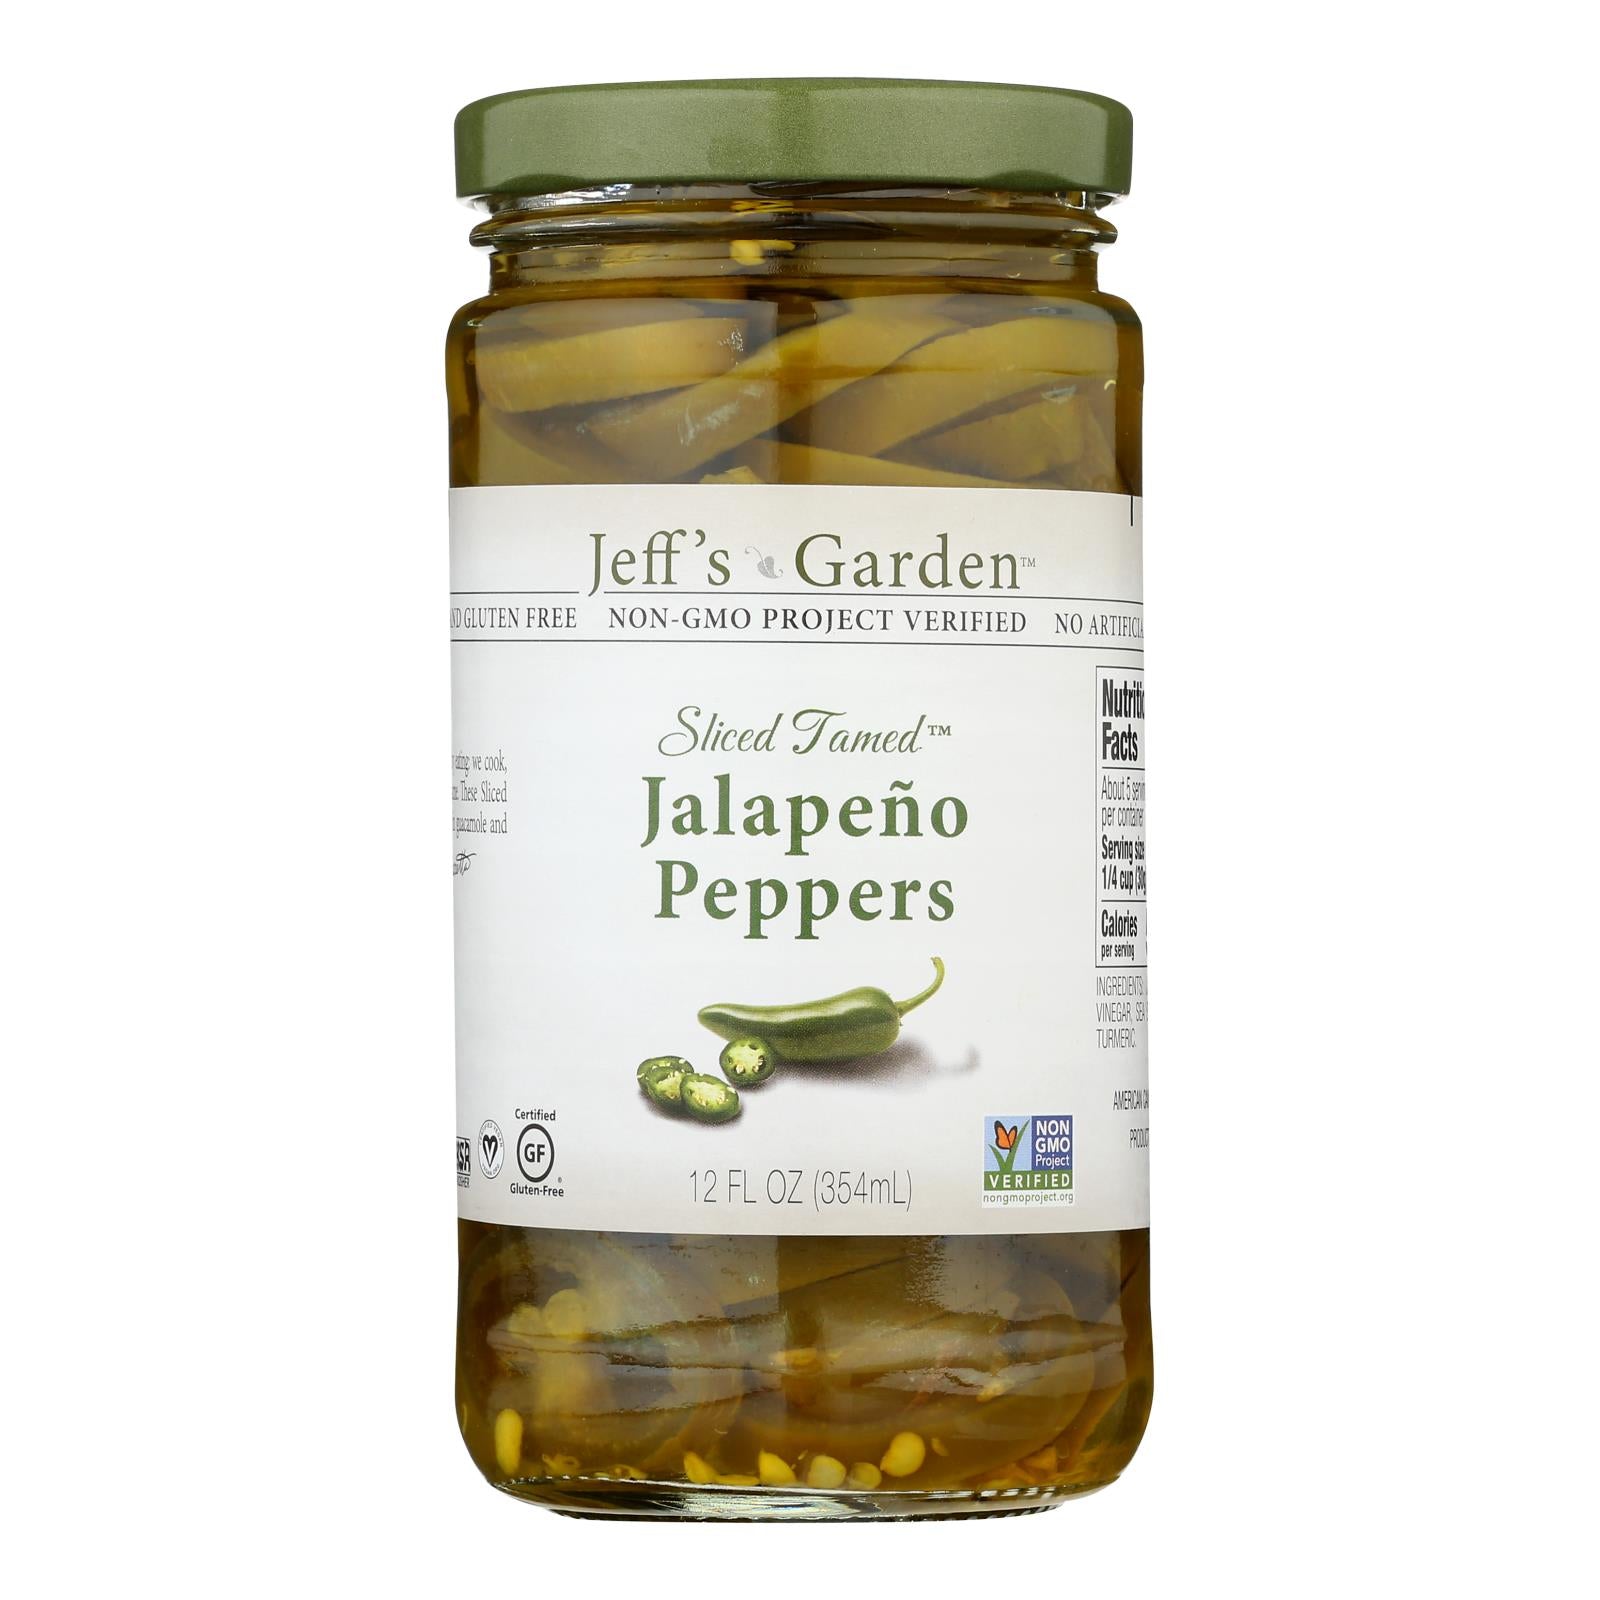 Jeff's Natural Jeff's Natural Jalapeno Peppers - Jalapeno - Case Of 6 - 12 Oz.